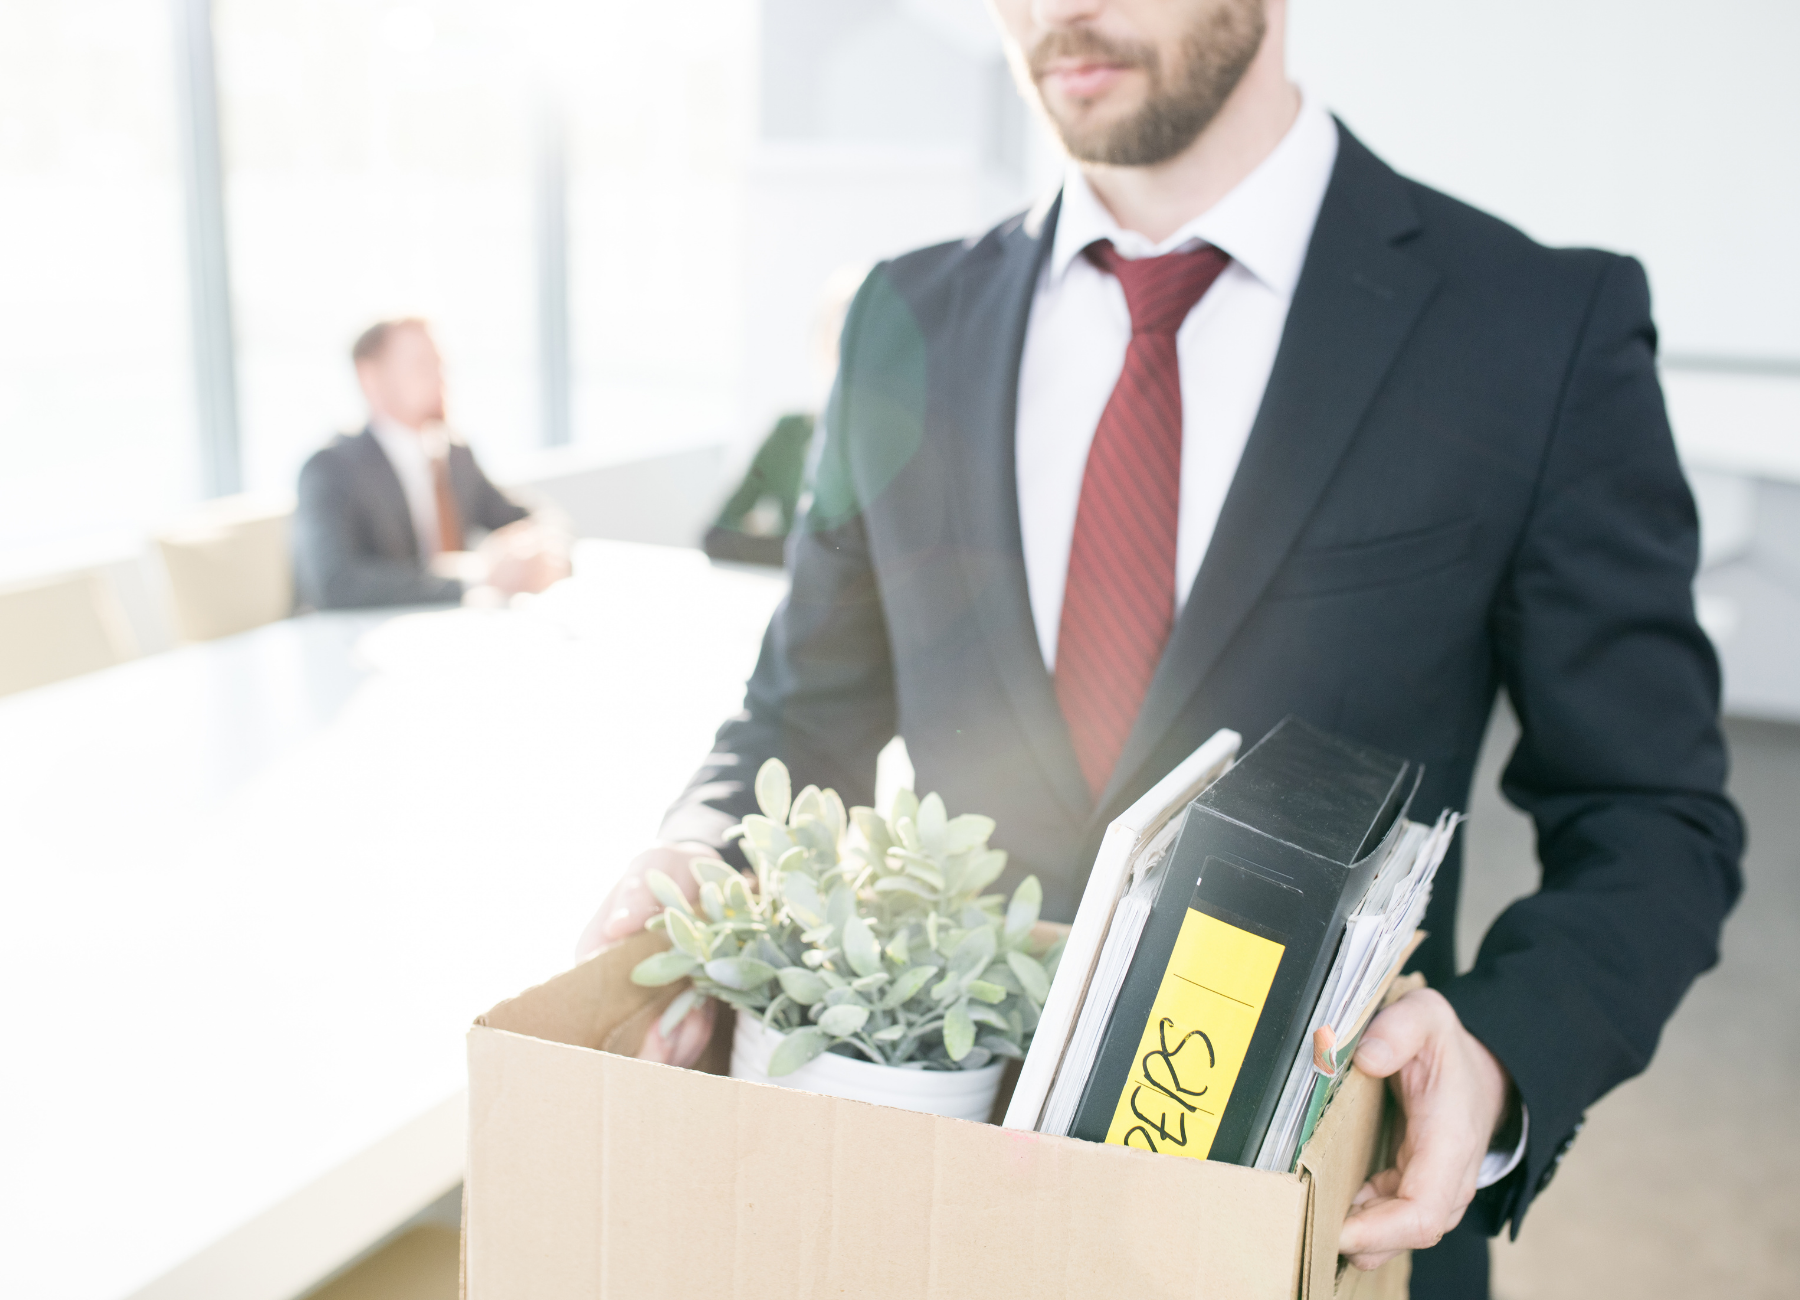 People are quitting their jobs: man in a suit leaving an office with a box containing a plant, binder, and notebooks